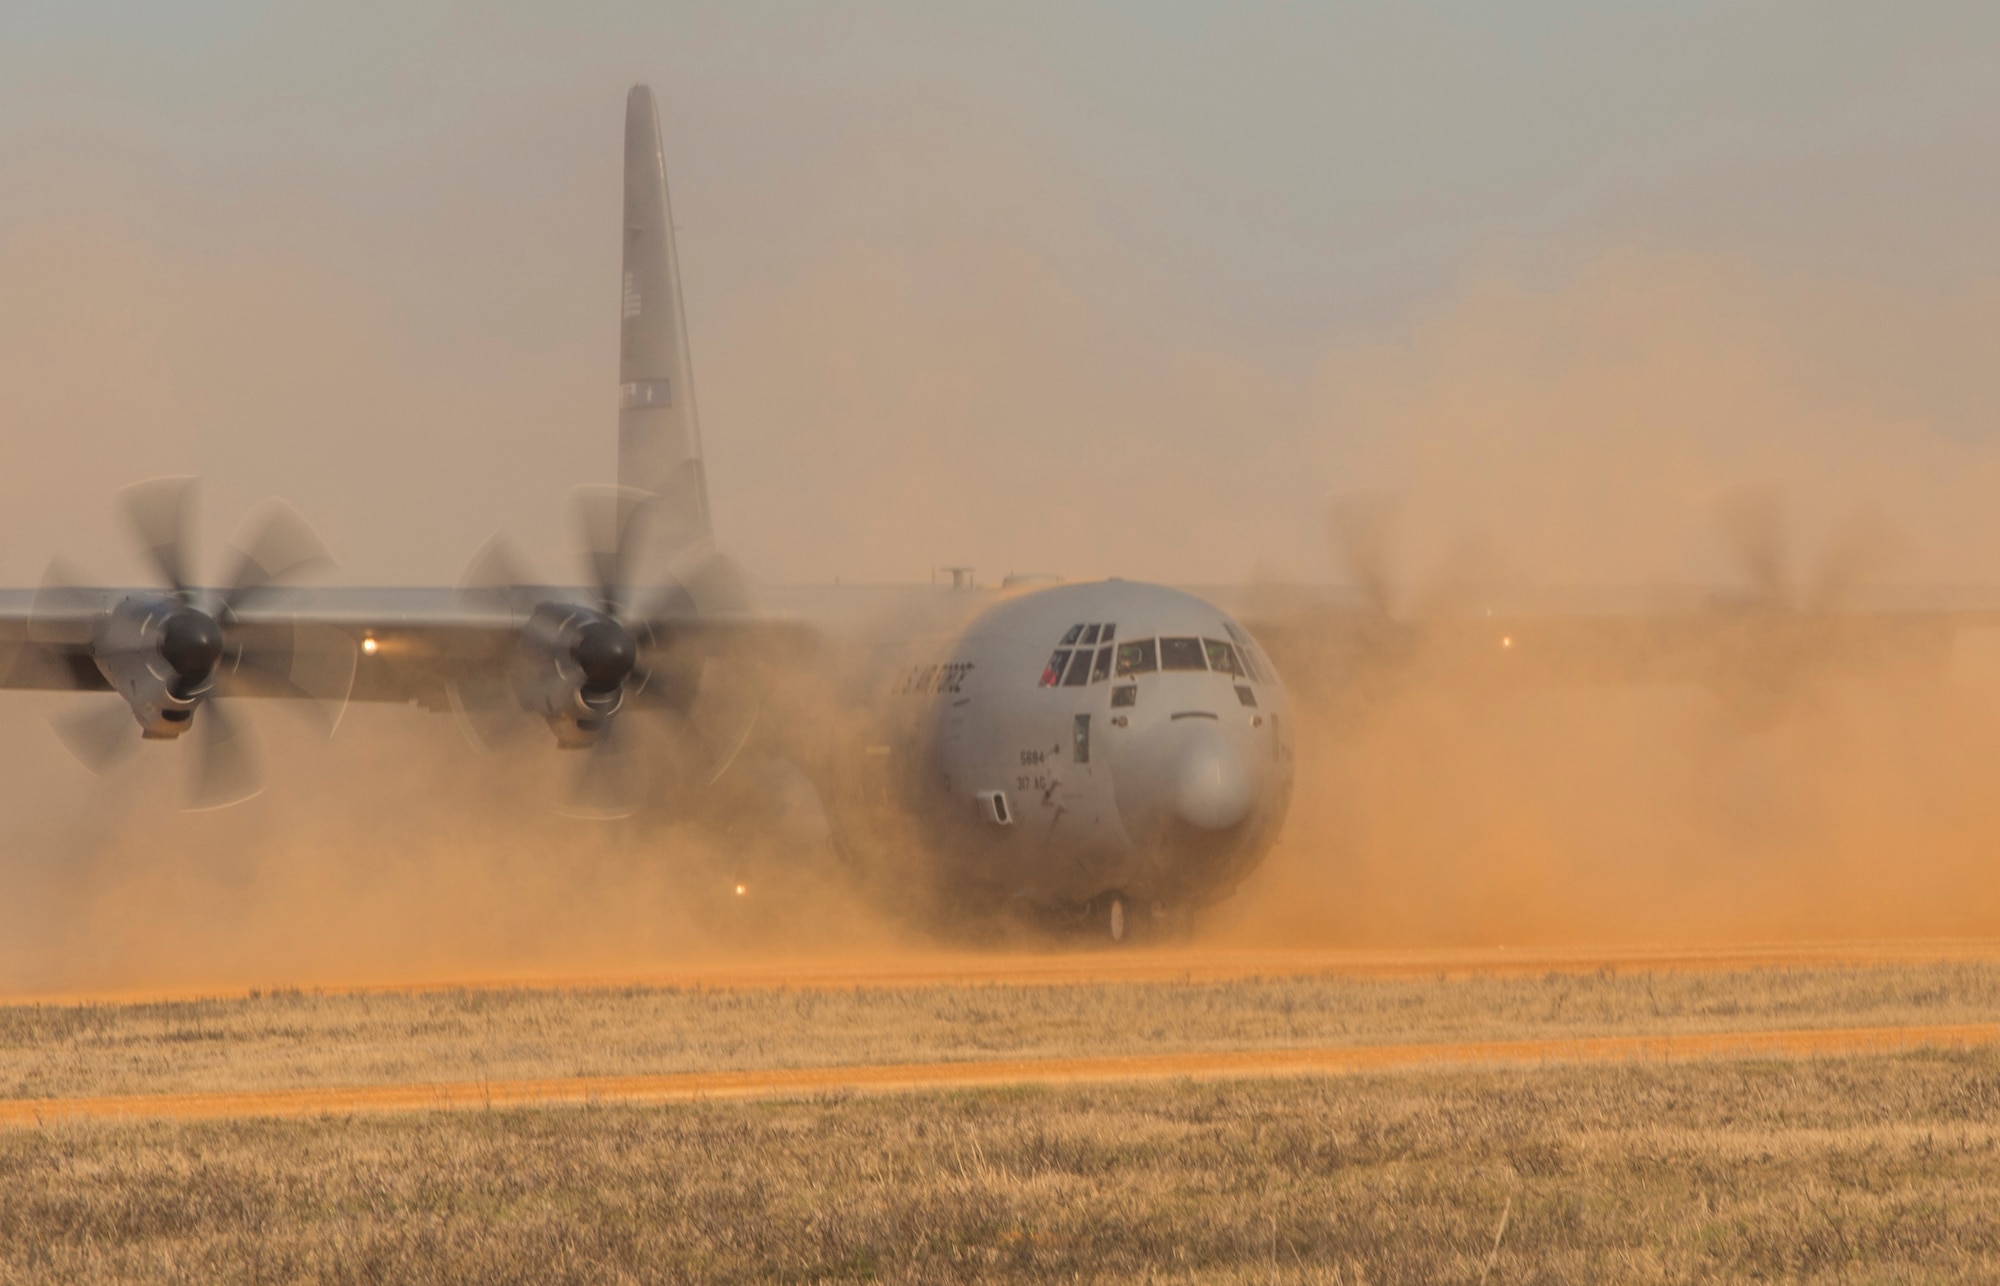 A U.S. Air Force C-130 Hercules lands during a training exercise at the Joint Readiness Training Center at Fort. Polk, La., Jan. 17, 2015. JRTC is a 34th Combat Training Squadron exercise for the U.S. Army that improves unit readiness by providing realistic, stressful, joint and combined arms training across the full spectrum of conflict. The Airmen helped support the exercise, and also provided an opportunity for internal training. (U.S. Air Force photo/Staff Sgt. Gustavo Gonzalez/RELEASED)